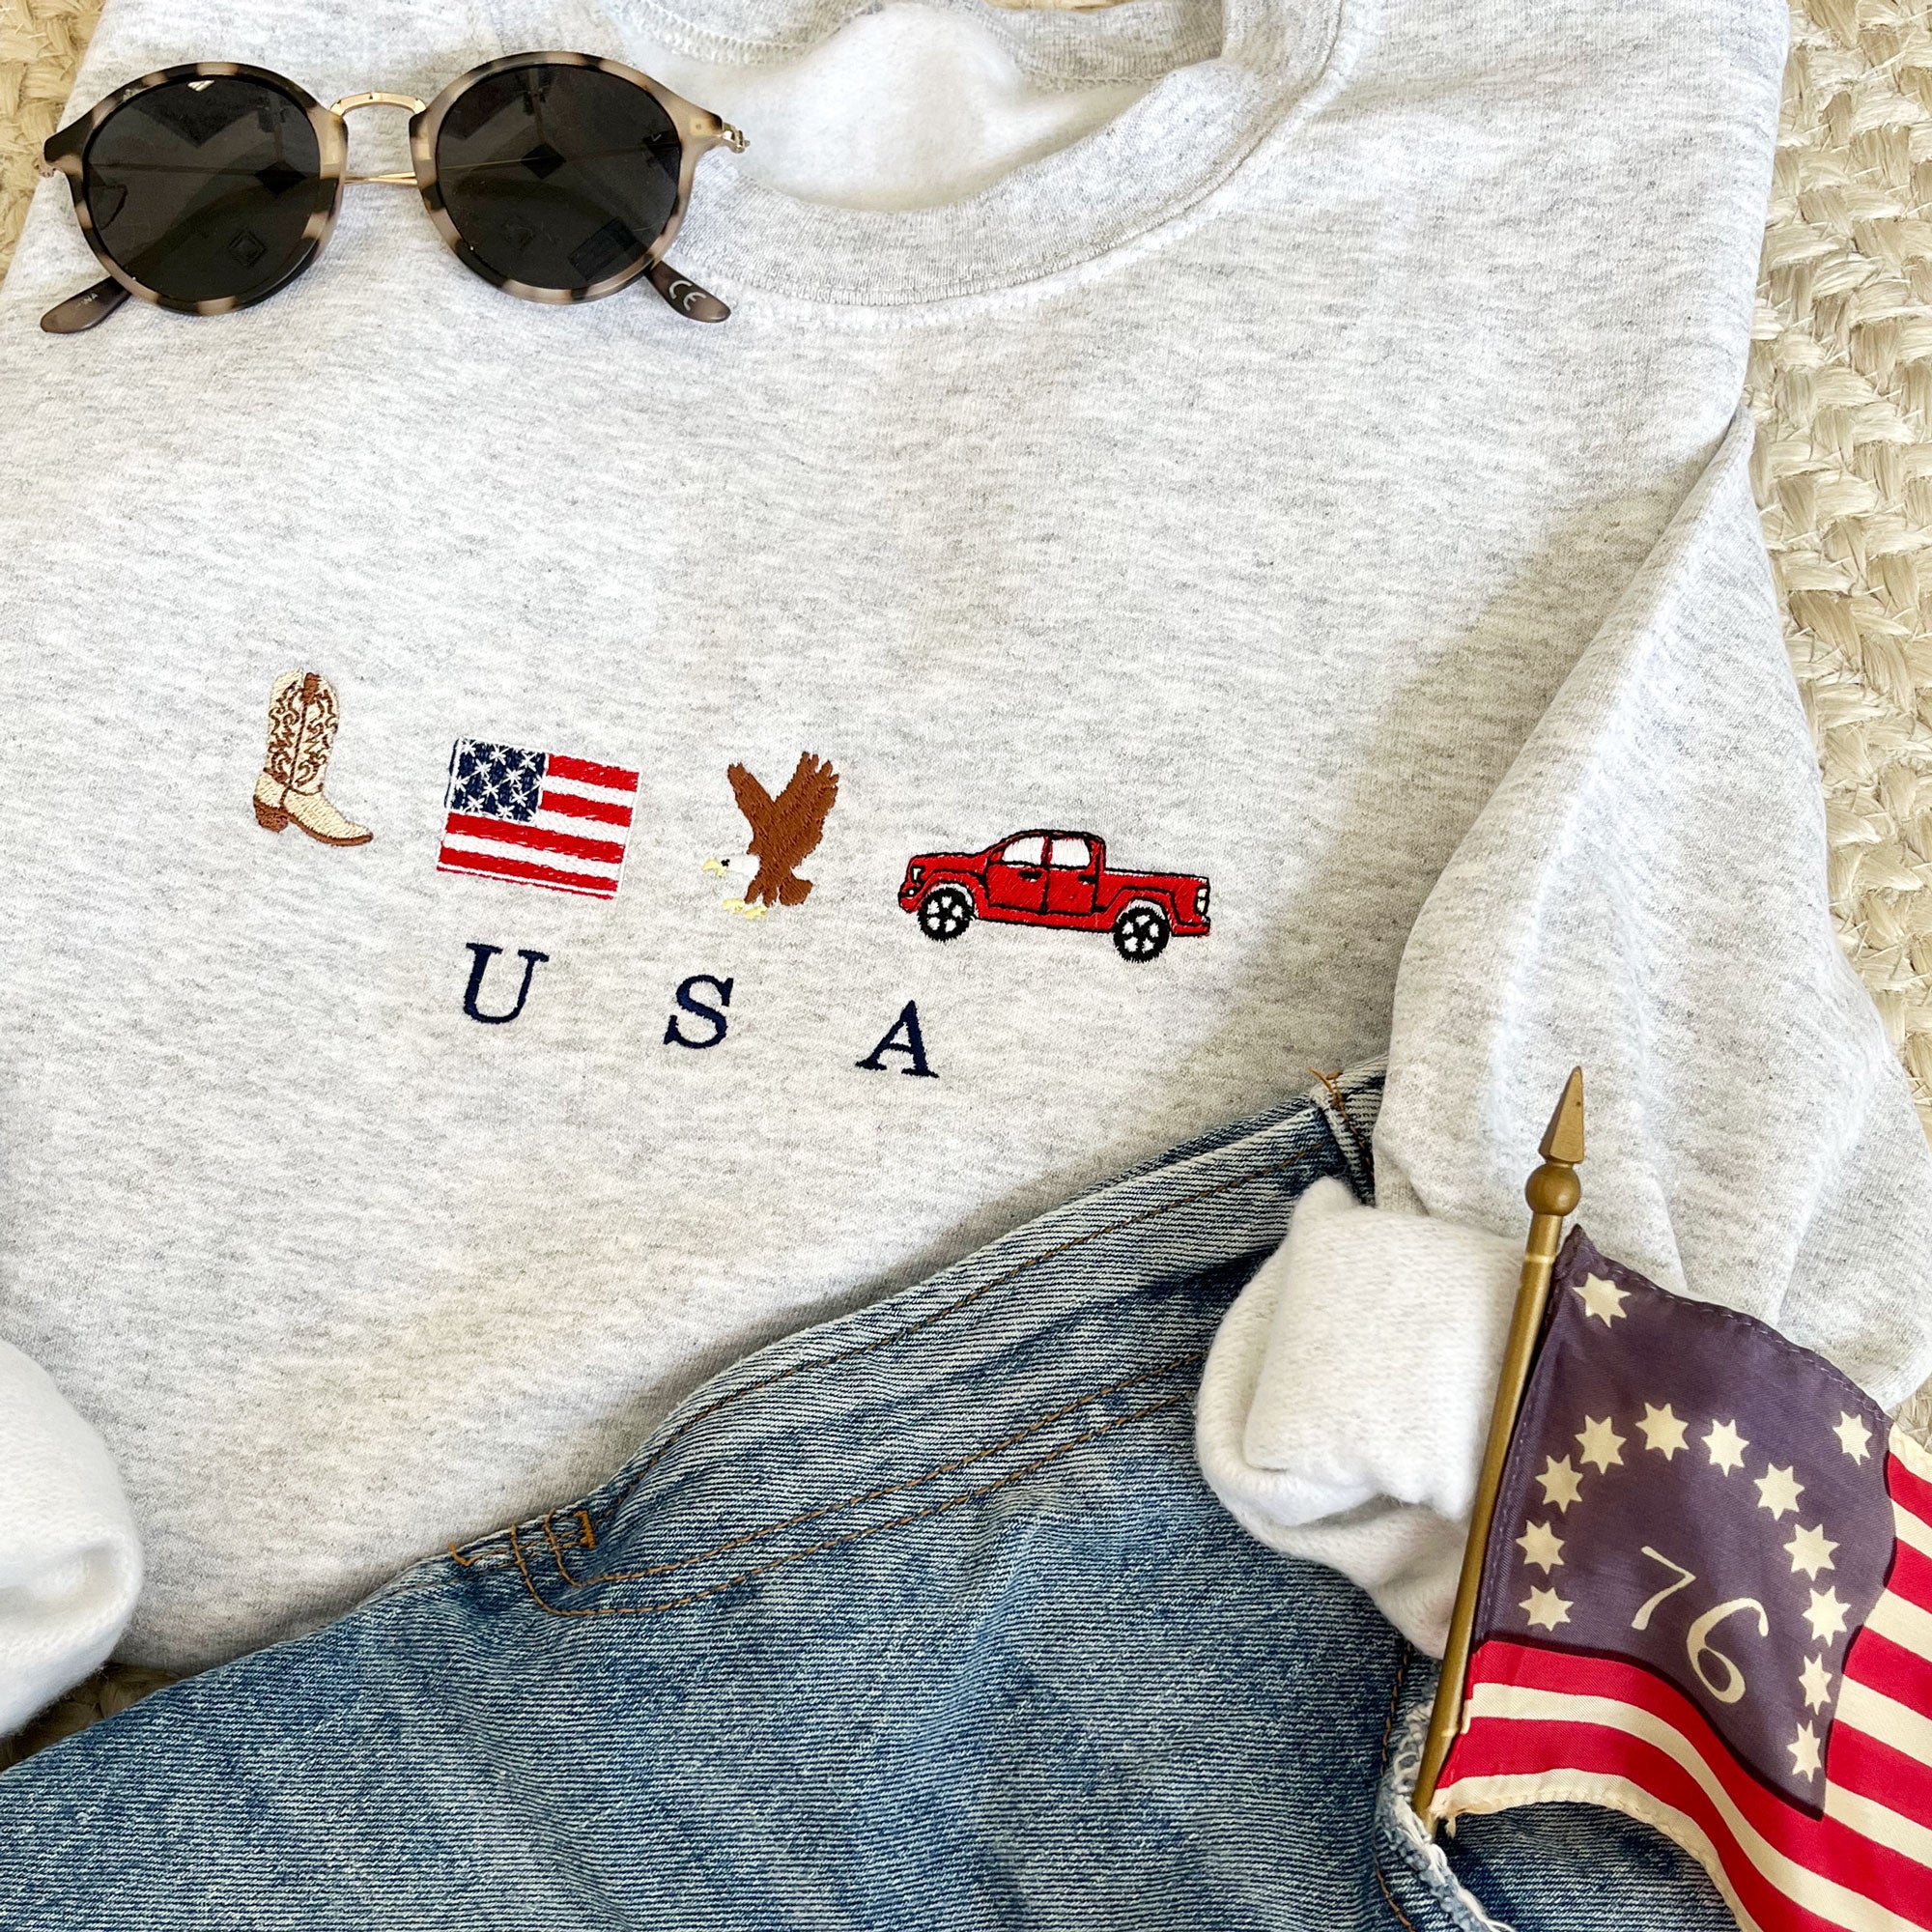 outfit layout featuring blue jean shorts, sunglasses, and an ash crewneck sweatshirt with cute USA icon embroidered design across the chest